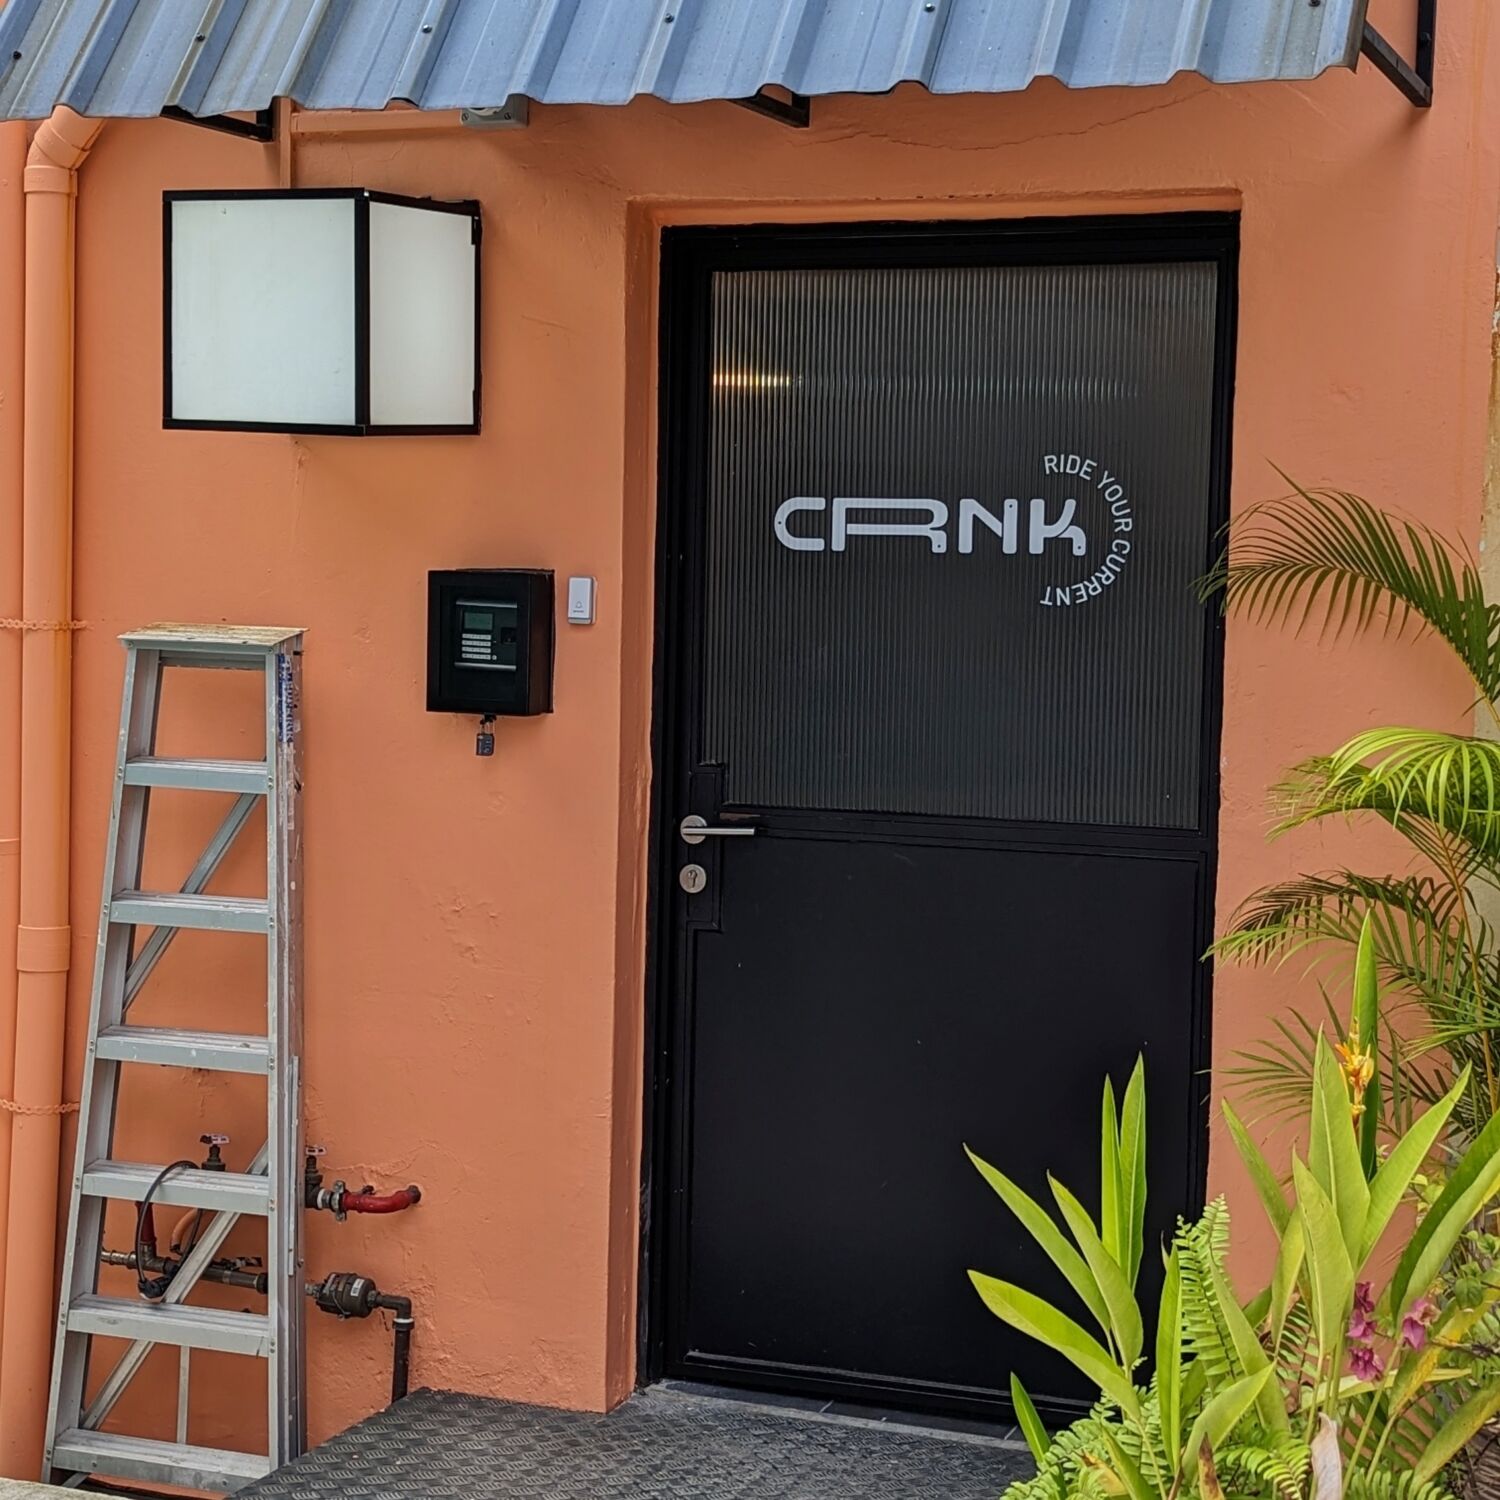 CRNK Singapore Alley Entrance